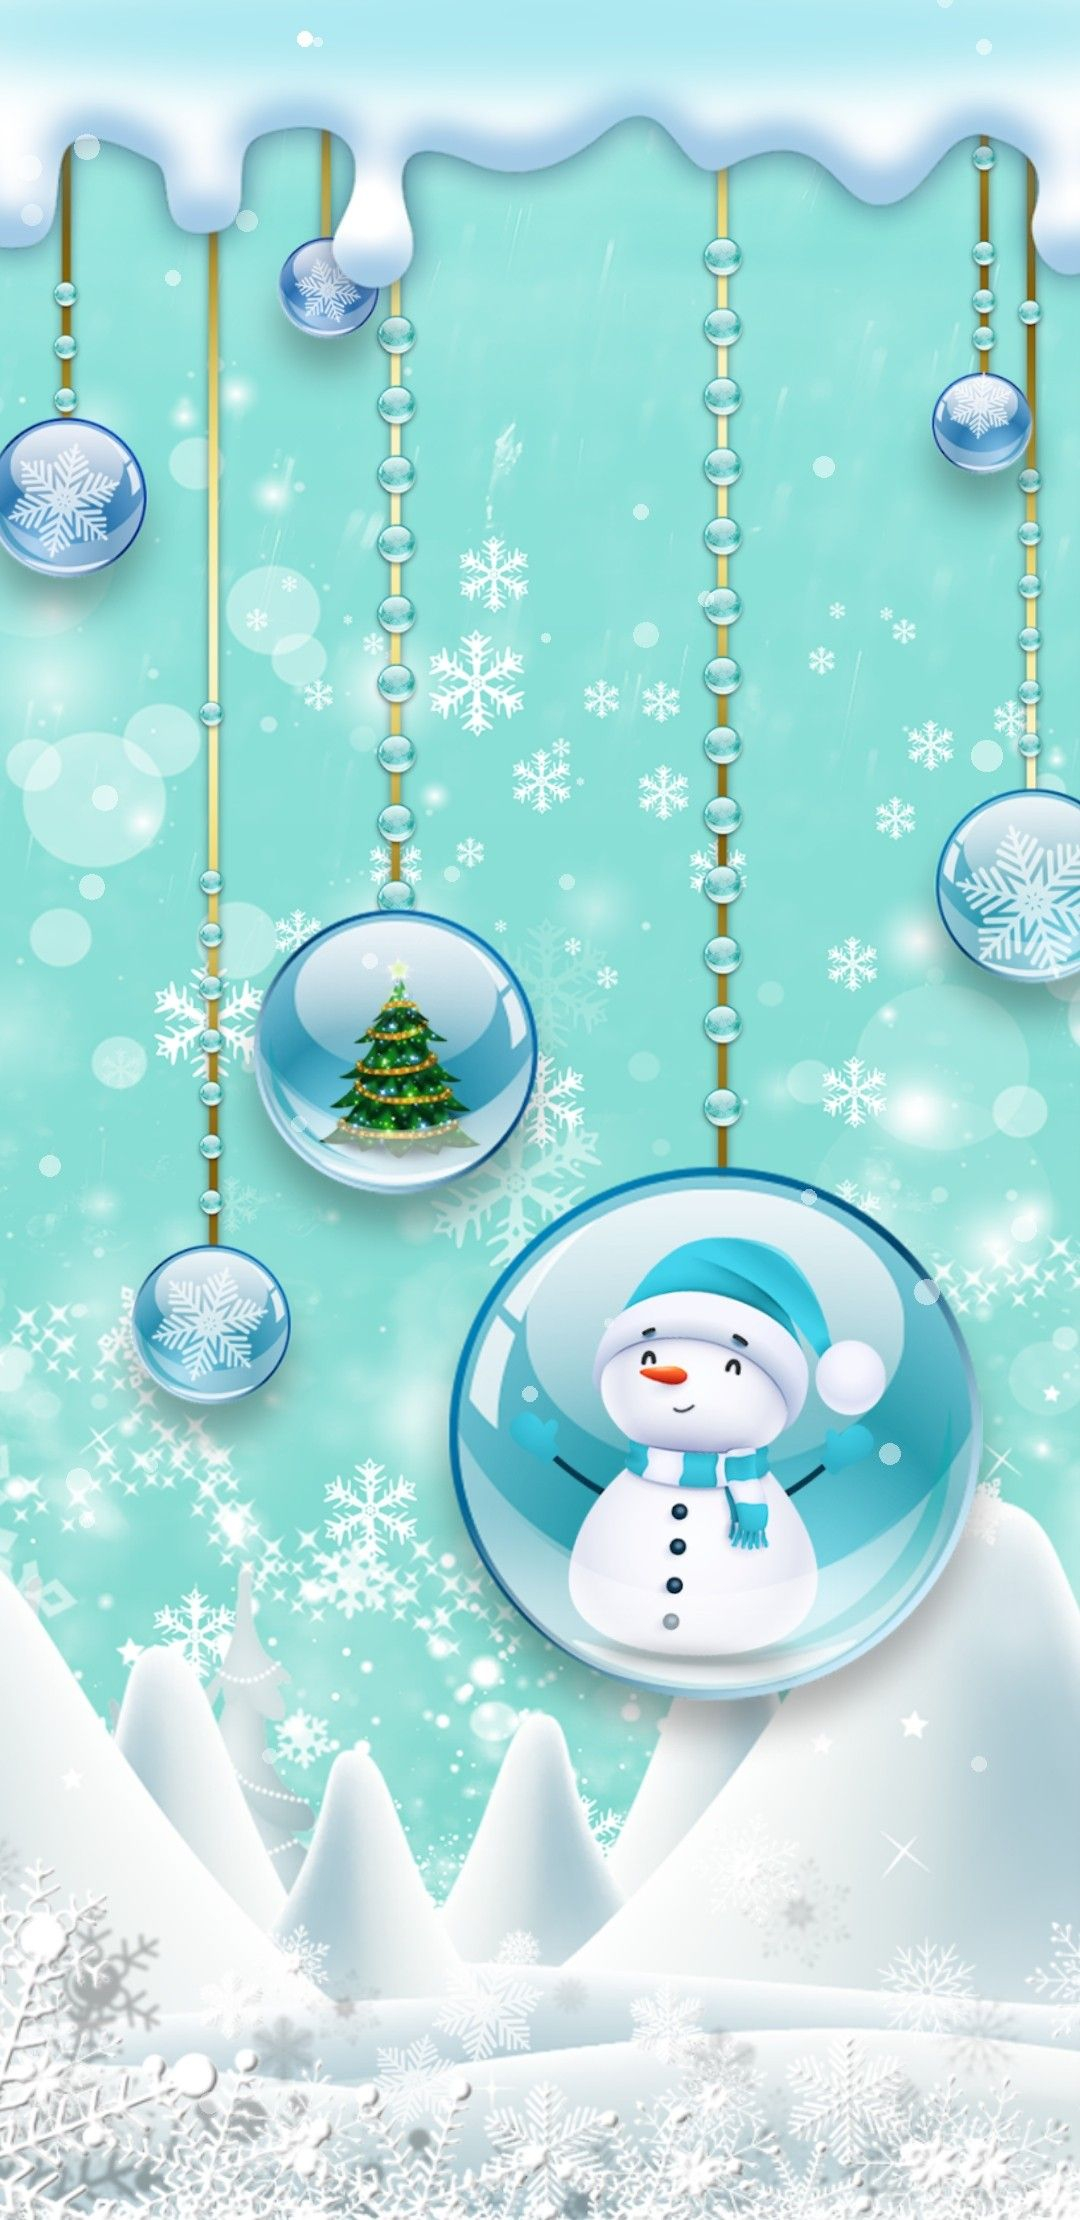 1080x2220 Pin by NicoleMaree77 on Christmas Wallpaper 2 | Christmas wallpaper hd, Cute christmas wallpaper, Christmas phone wallpaper